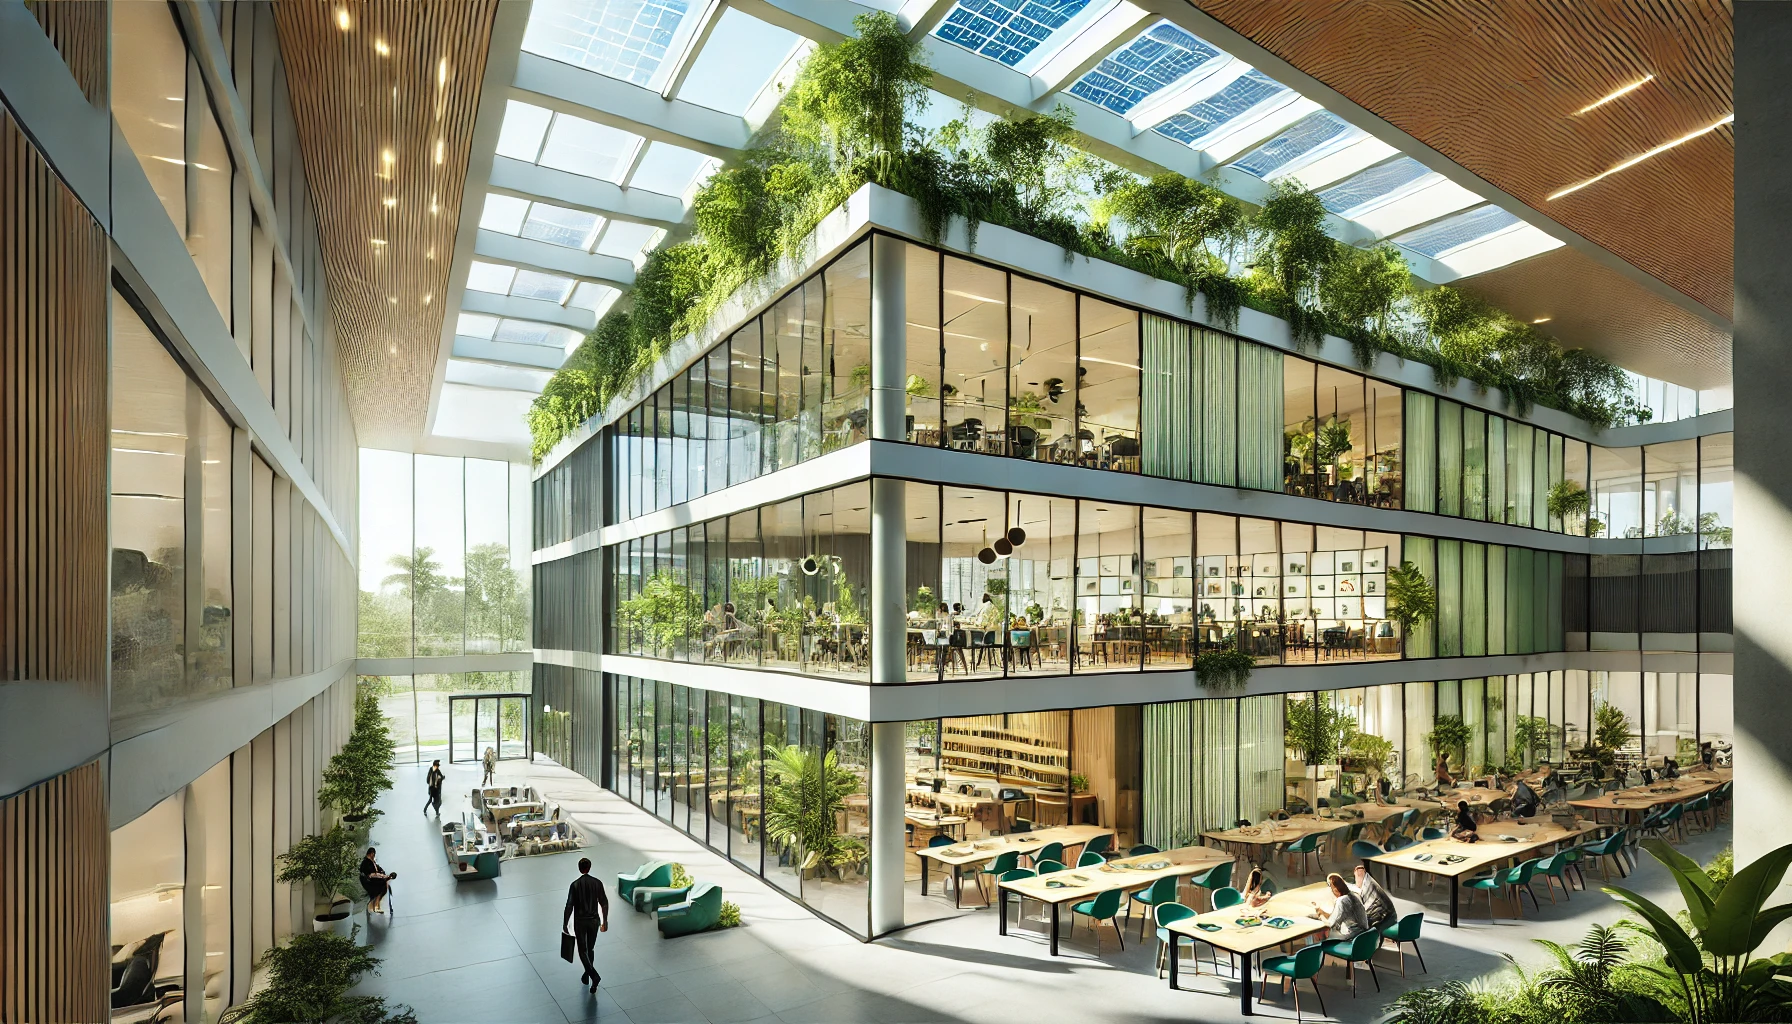 The Role of Daylighting in Green Building Design